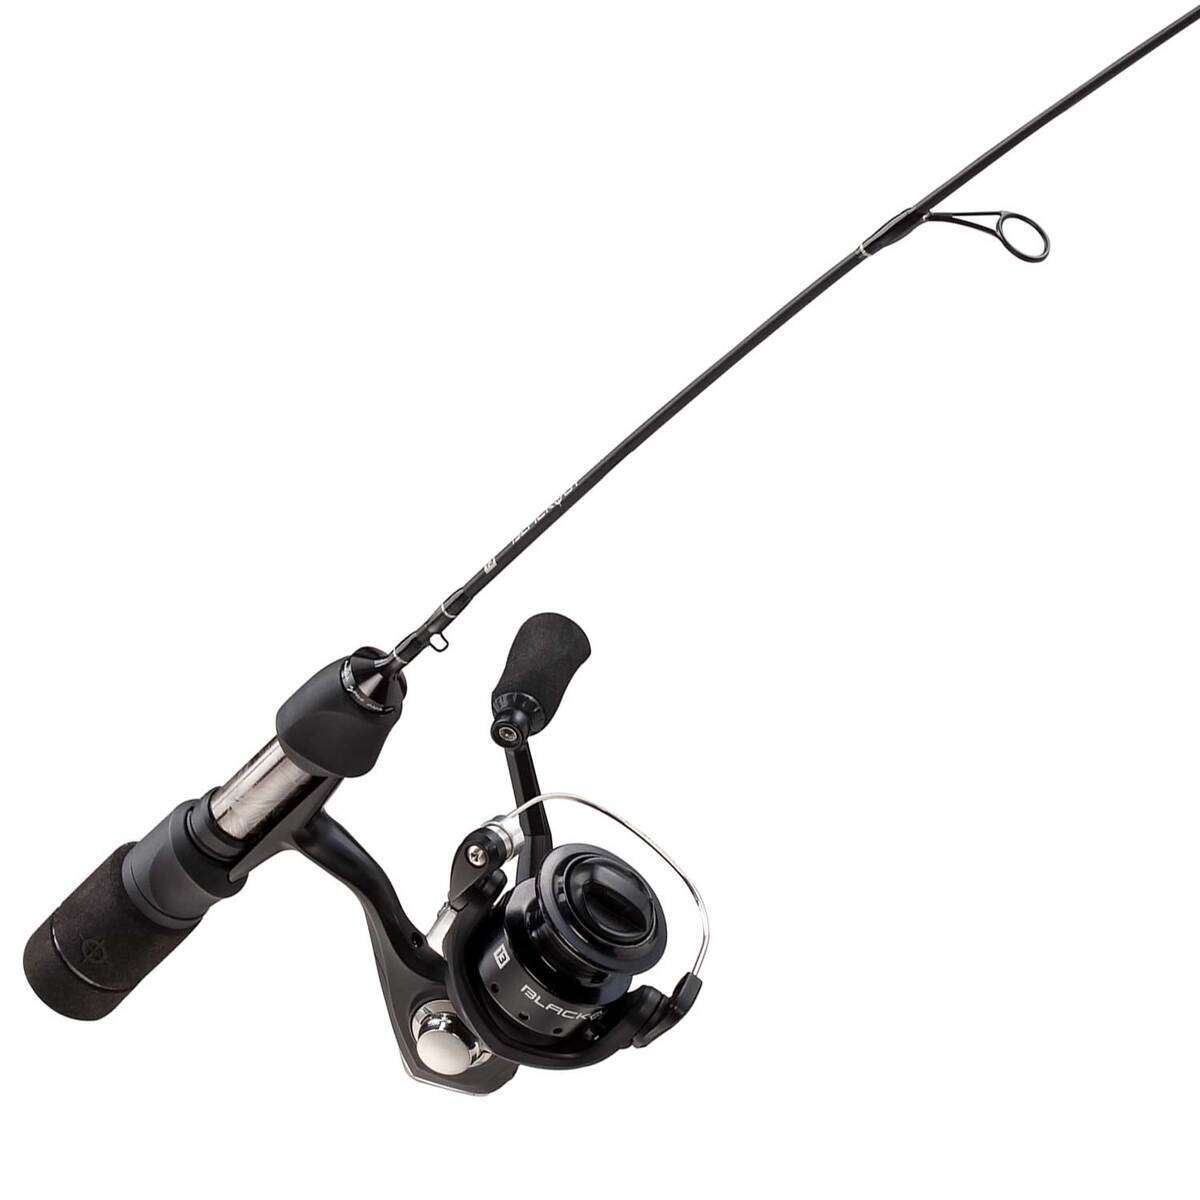 13 Fishing Blackout Ice Fishing Spinning Rod and Reel Combo - Black, 28in,  Medium Light Power